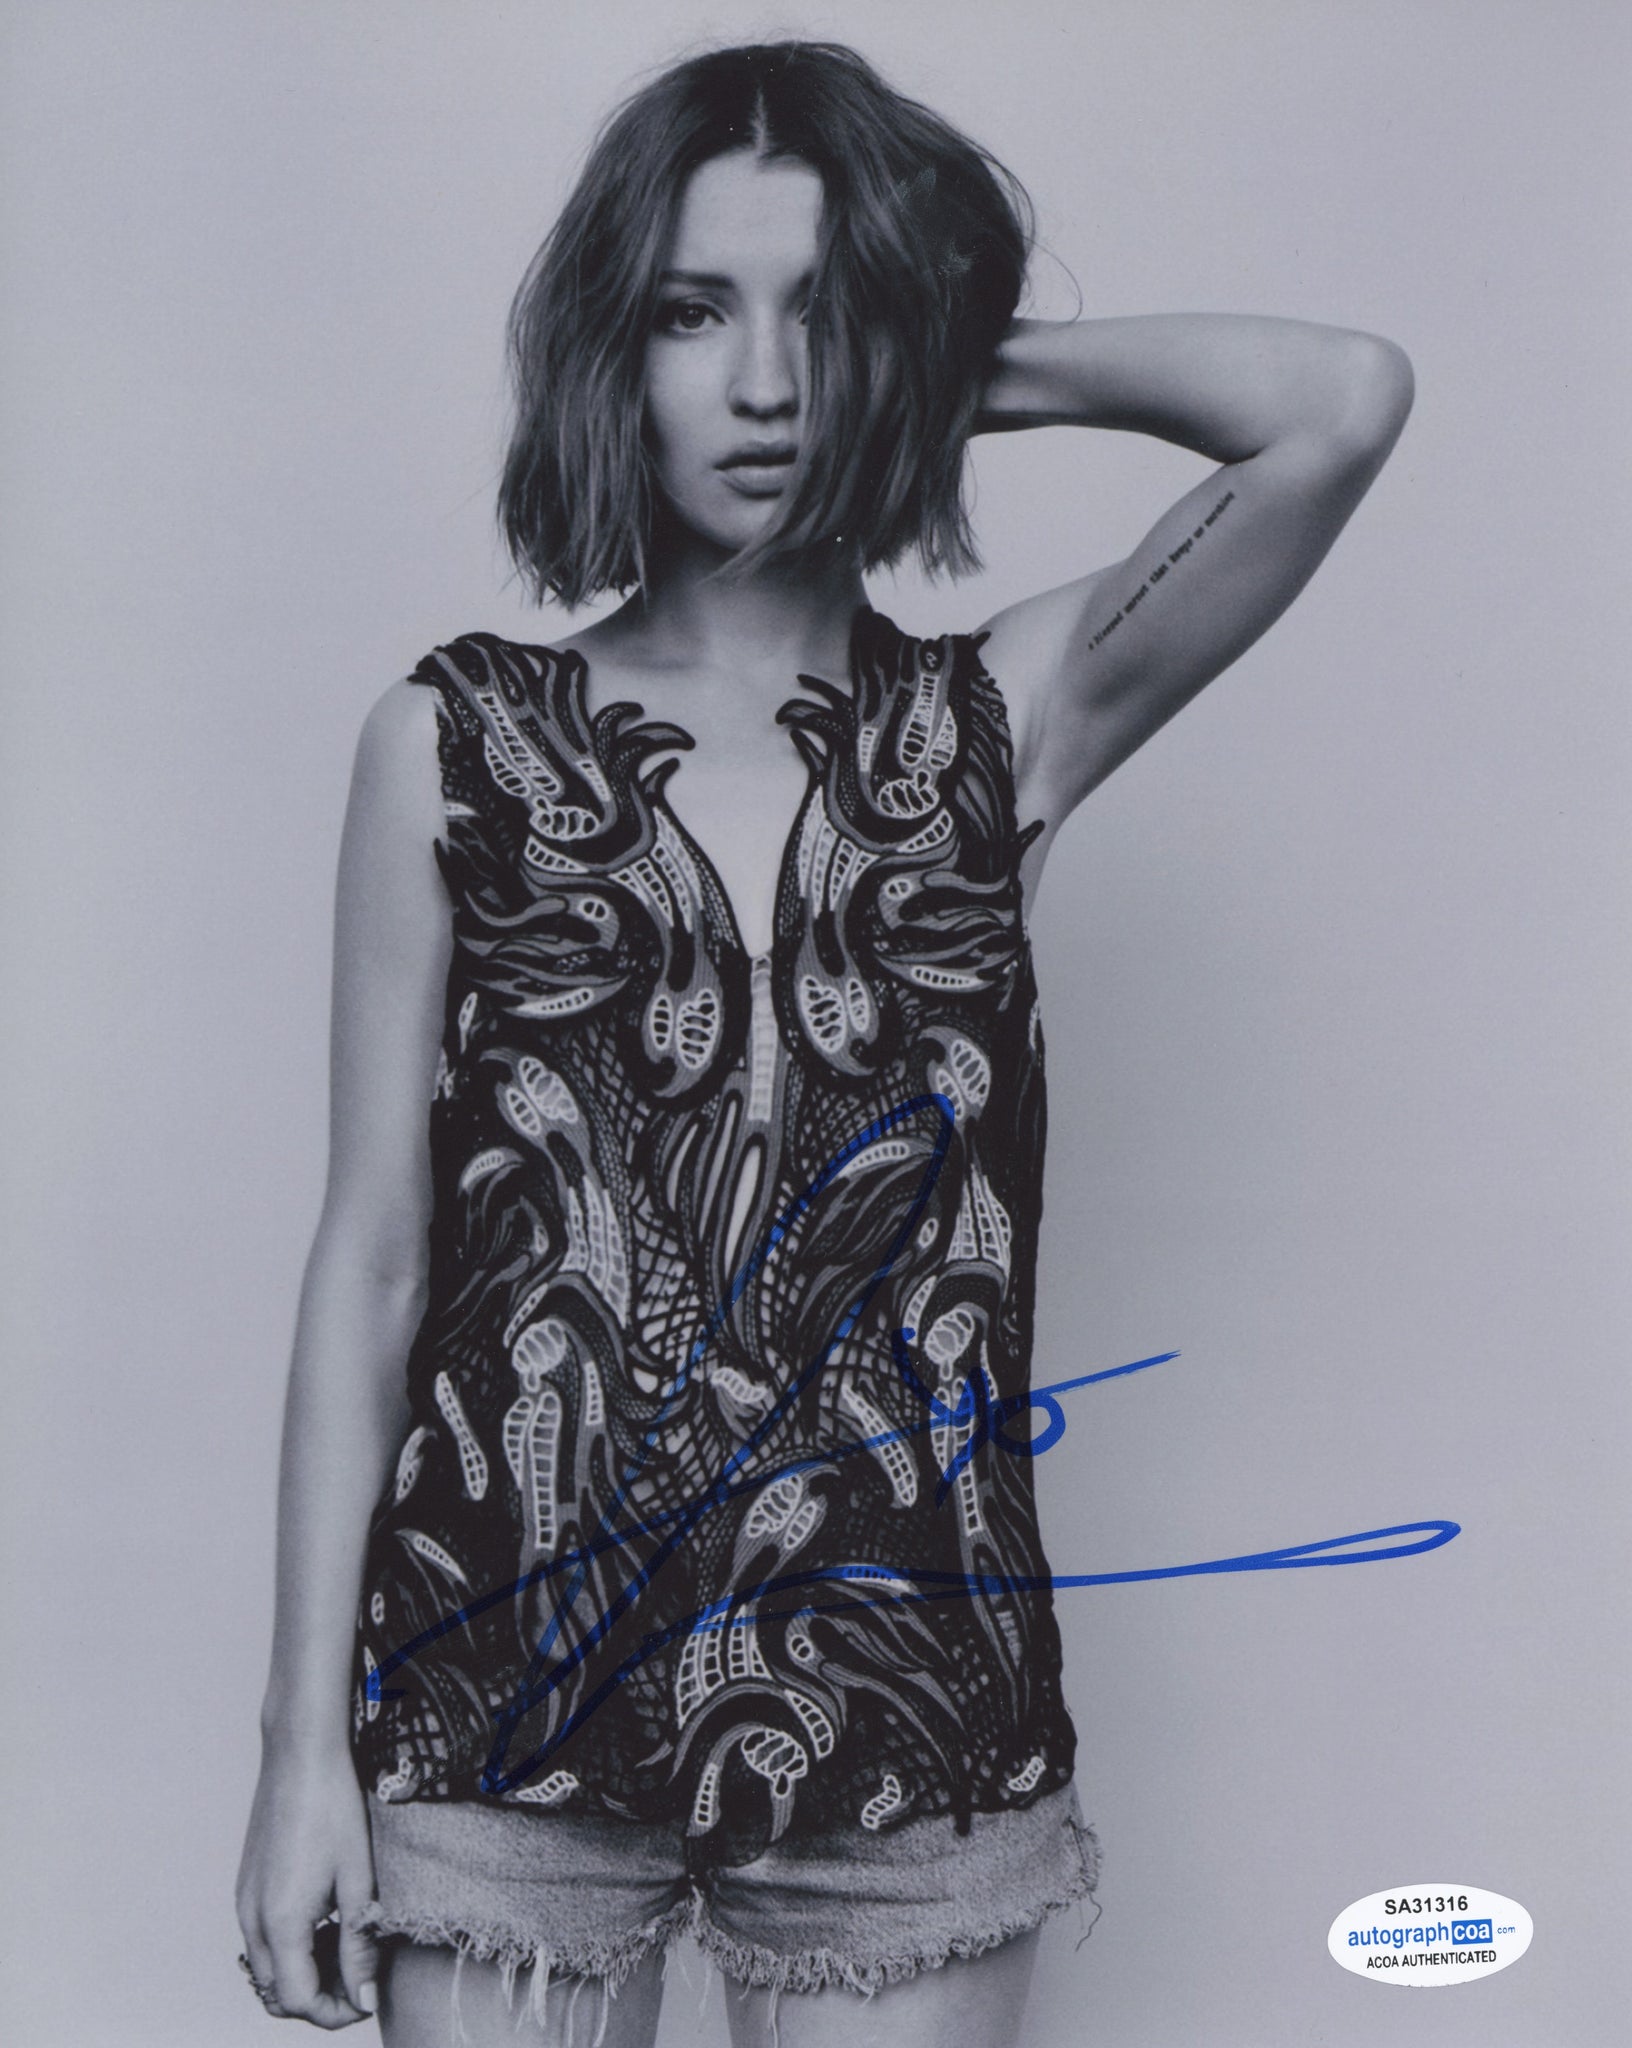 Emily Browning Sexy Signed Autograph 8x10 Photo ACOA #3 - Outlaw Hobbies Authentic Autographs